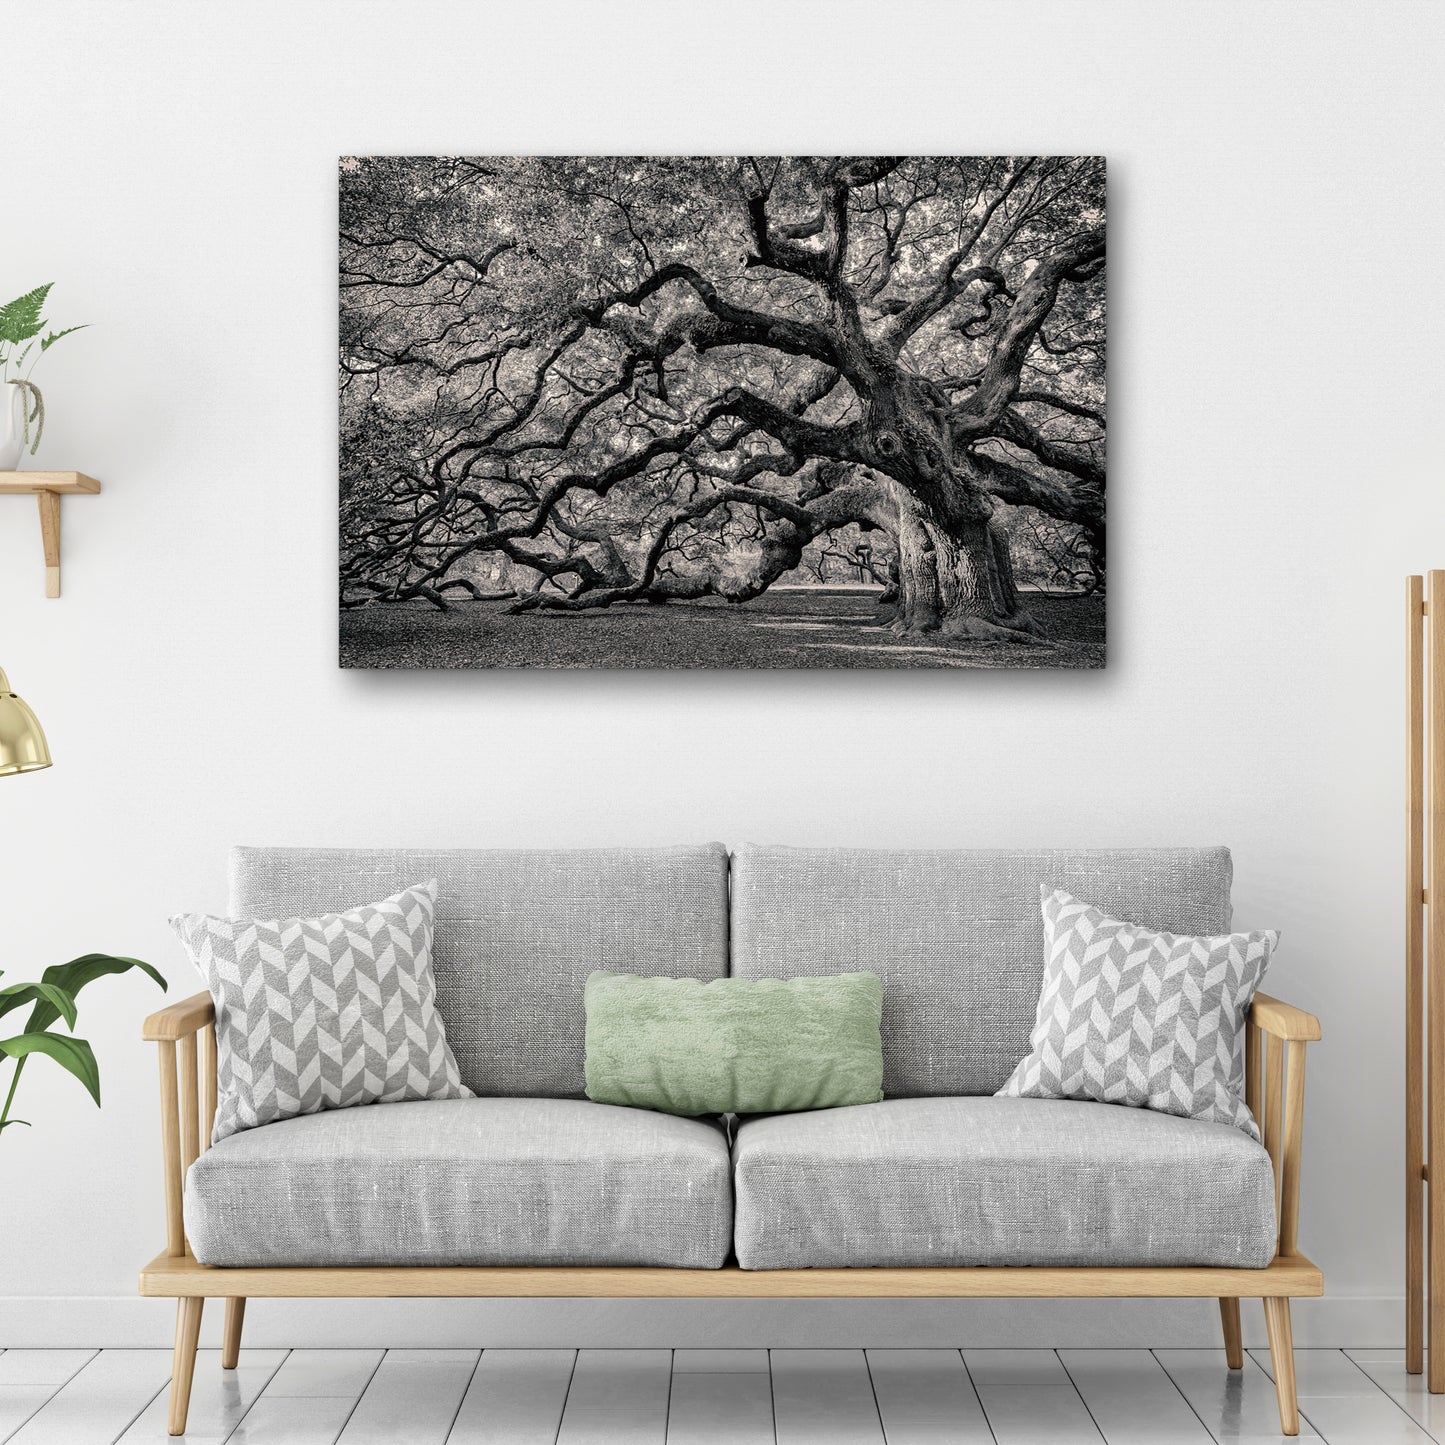 Monochrome Angel Oak Tree Canvas Wall Art Style 2 - Image by Tailored Canvases